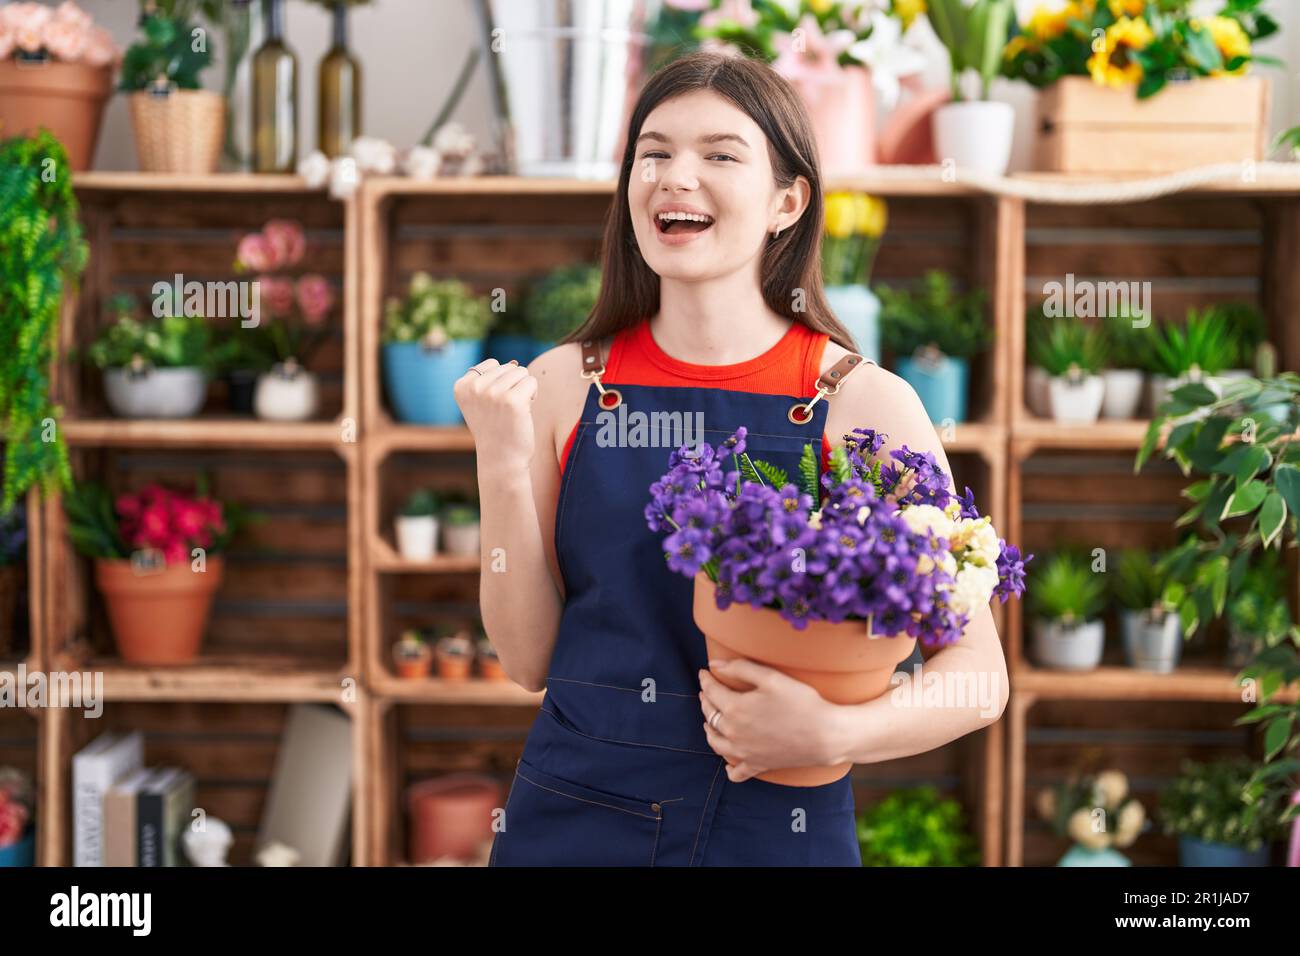 Young caucasian woman working at florist shop holding pot with flowers screaming proud, celebrating victory and success very excited with raised arms Stock Photo